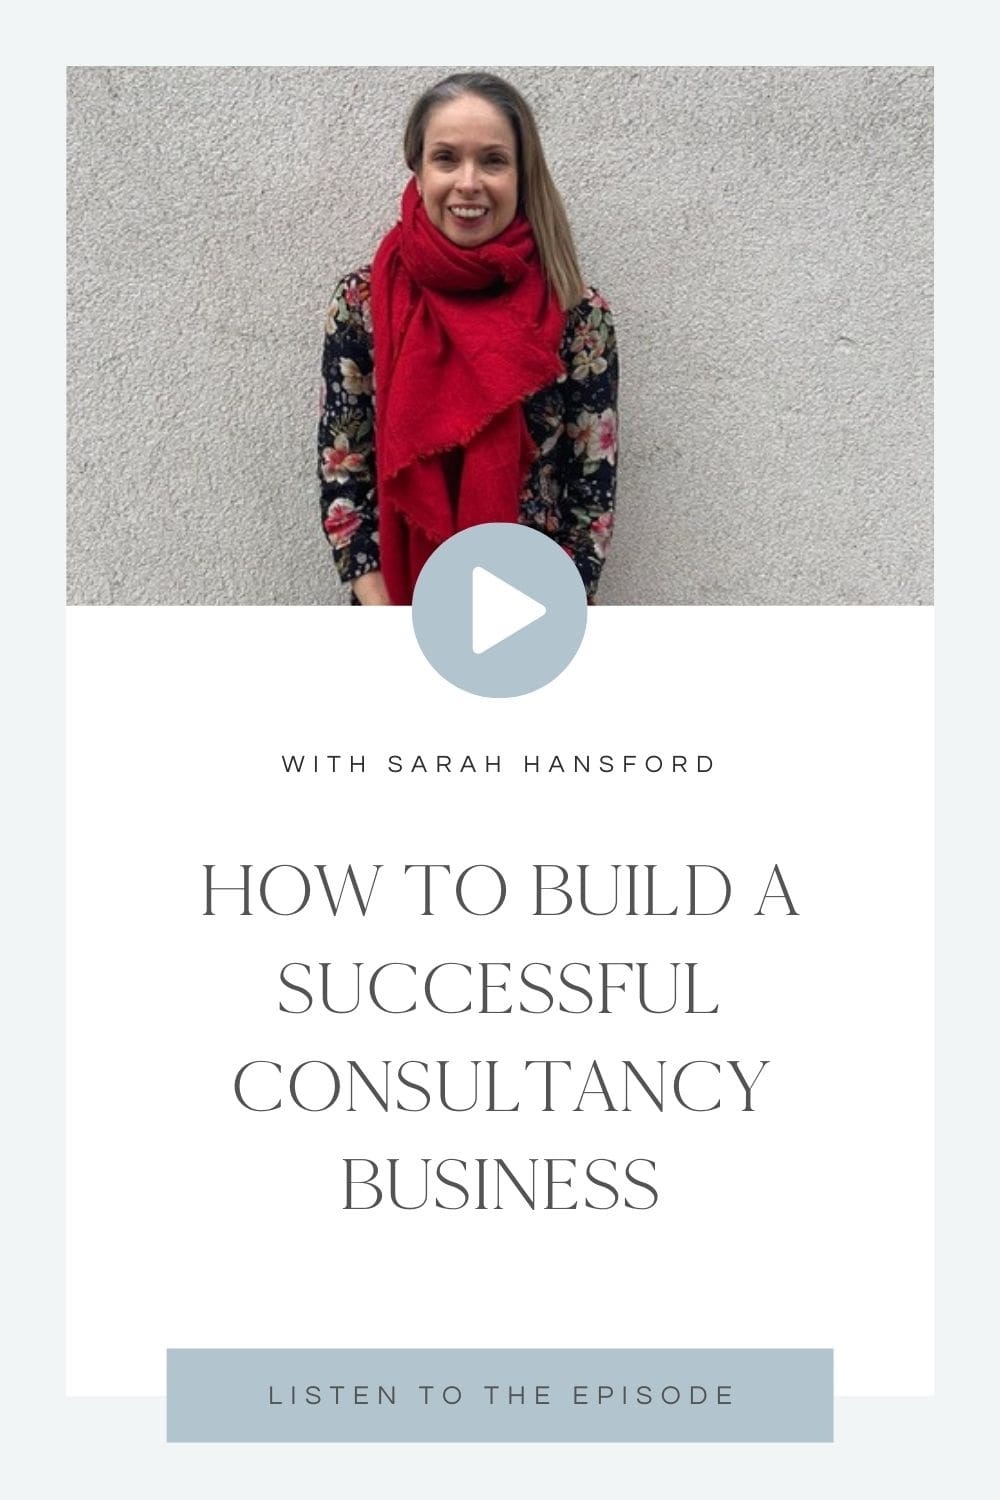 How to build a successful consultancy business with Sarah Hansford